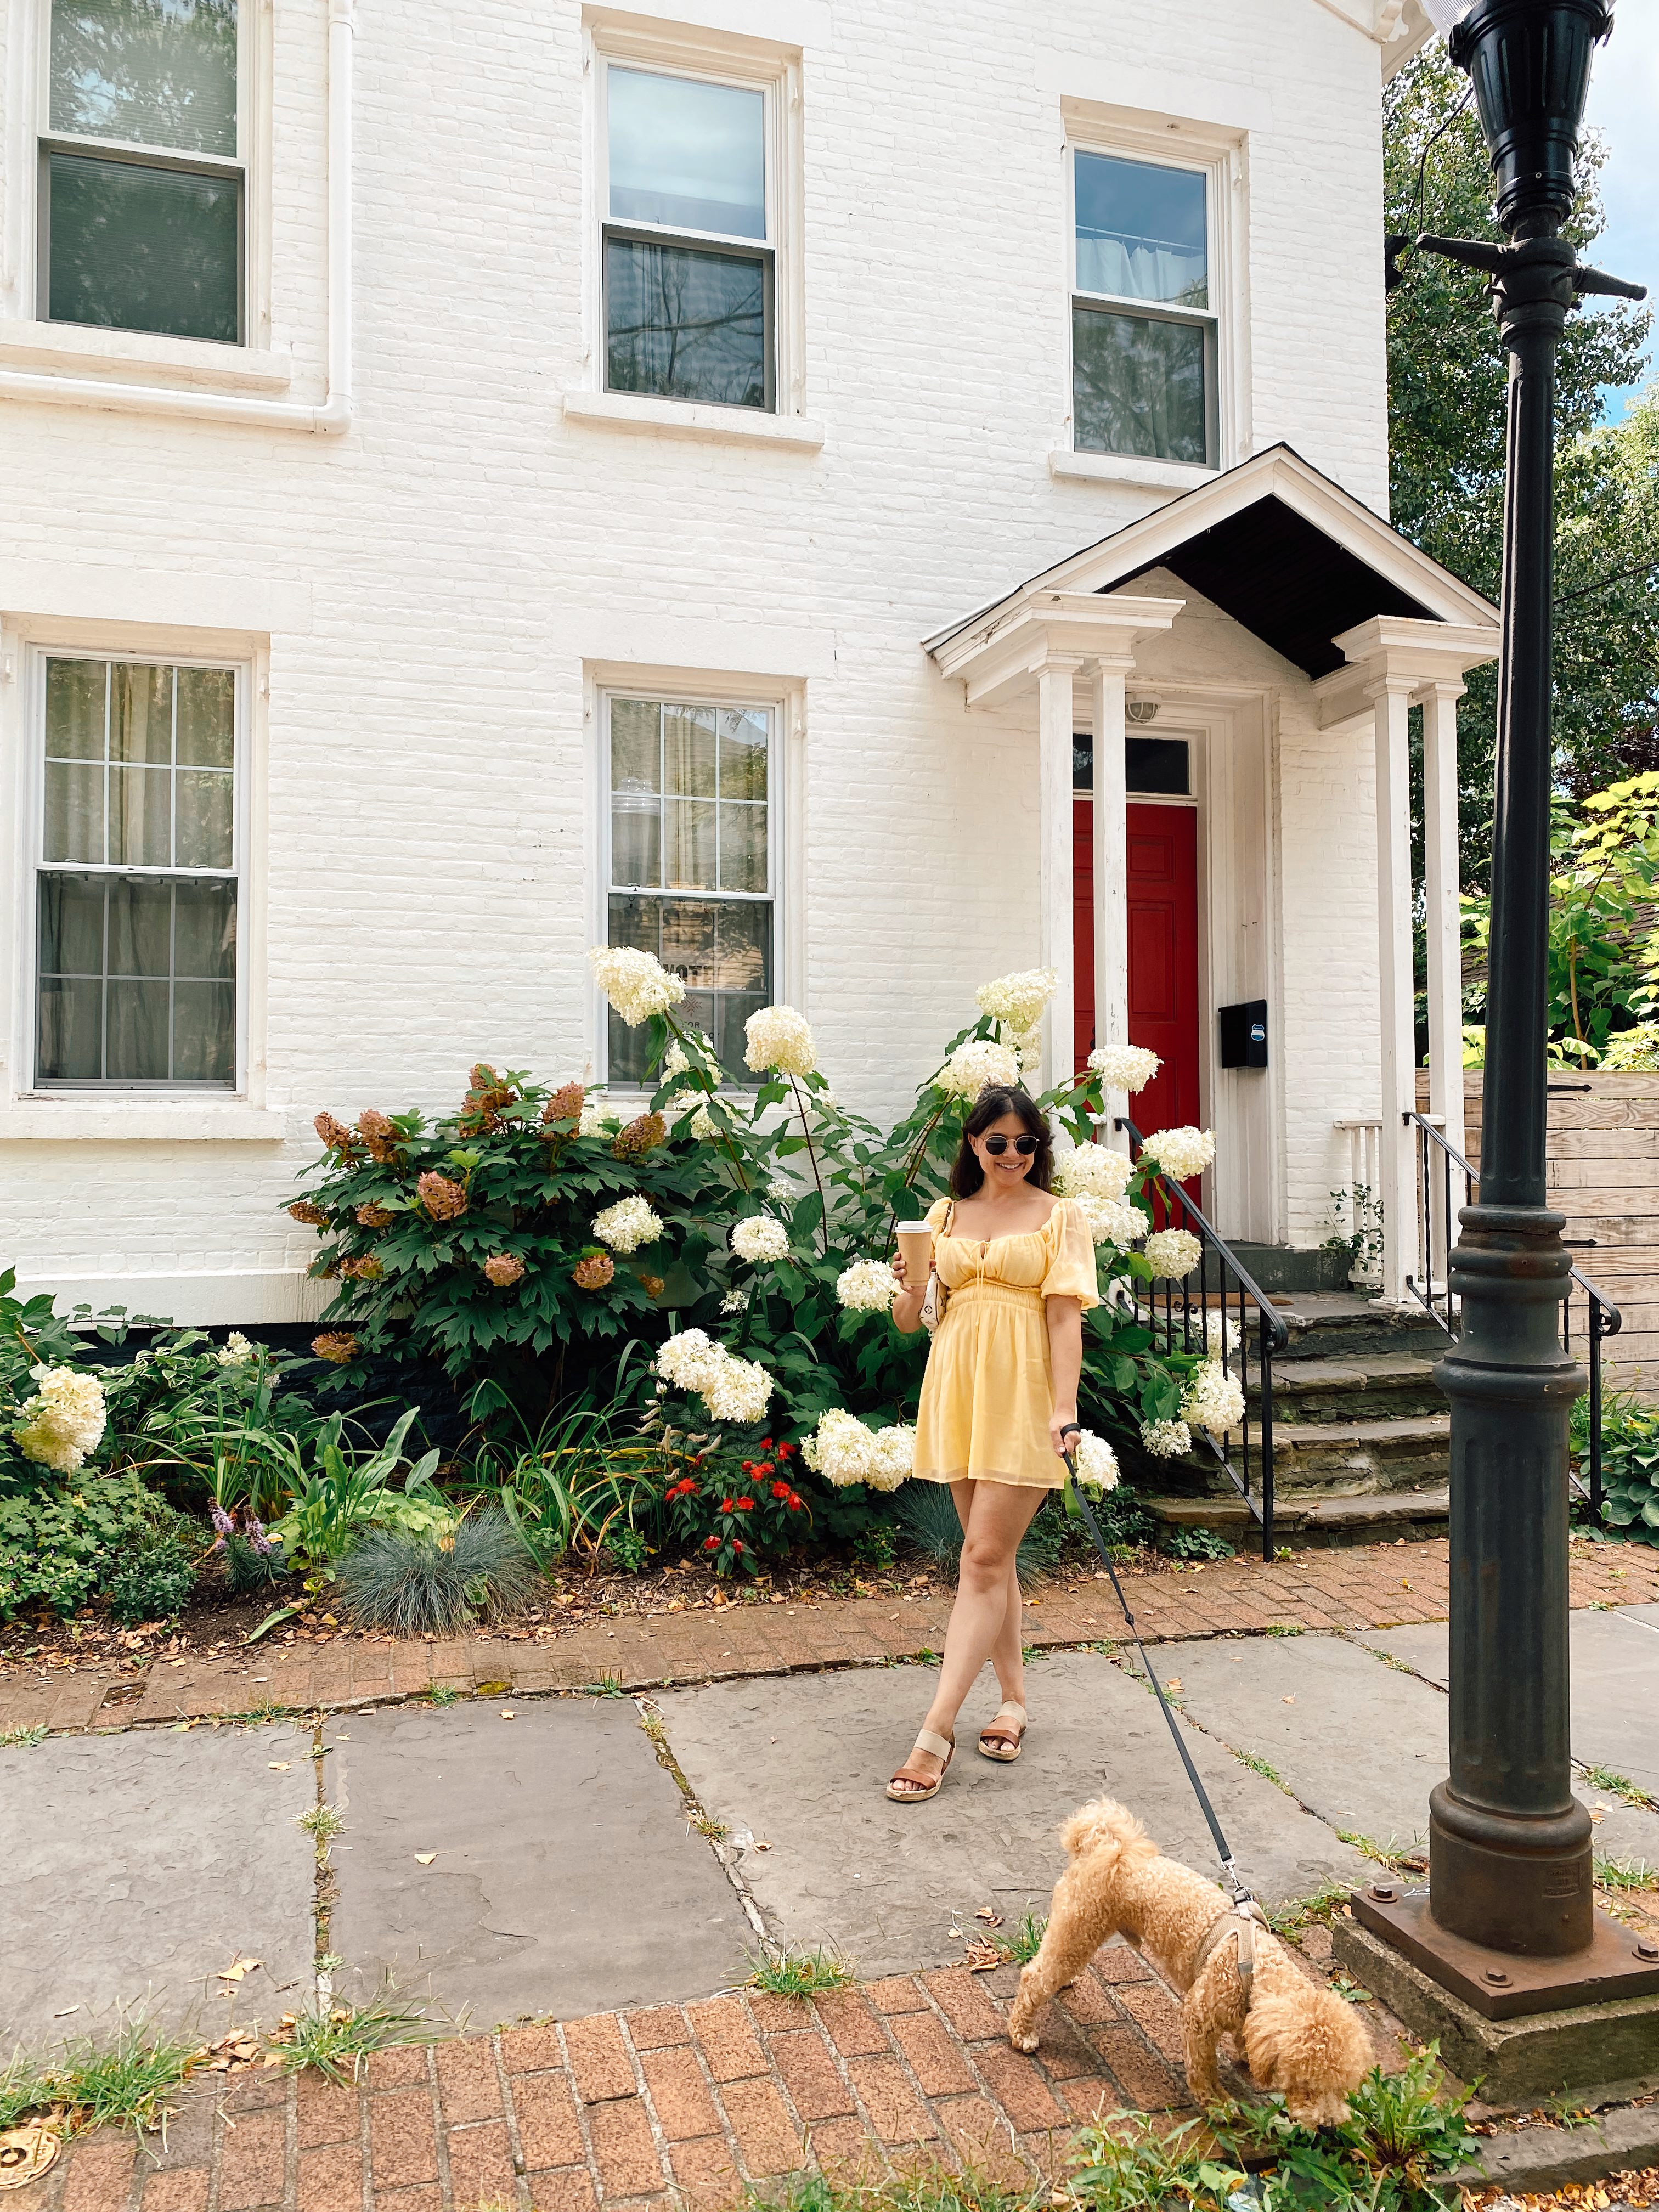 A woman wearing a yellow dress and walking her dog in front of a white house with a red door